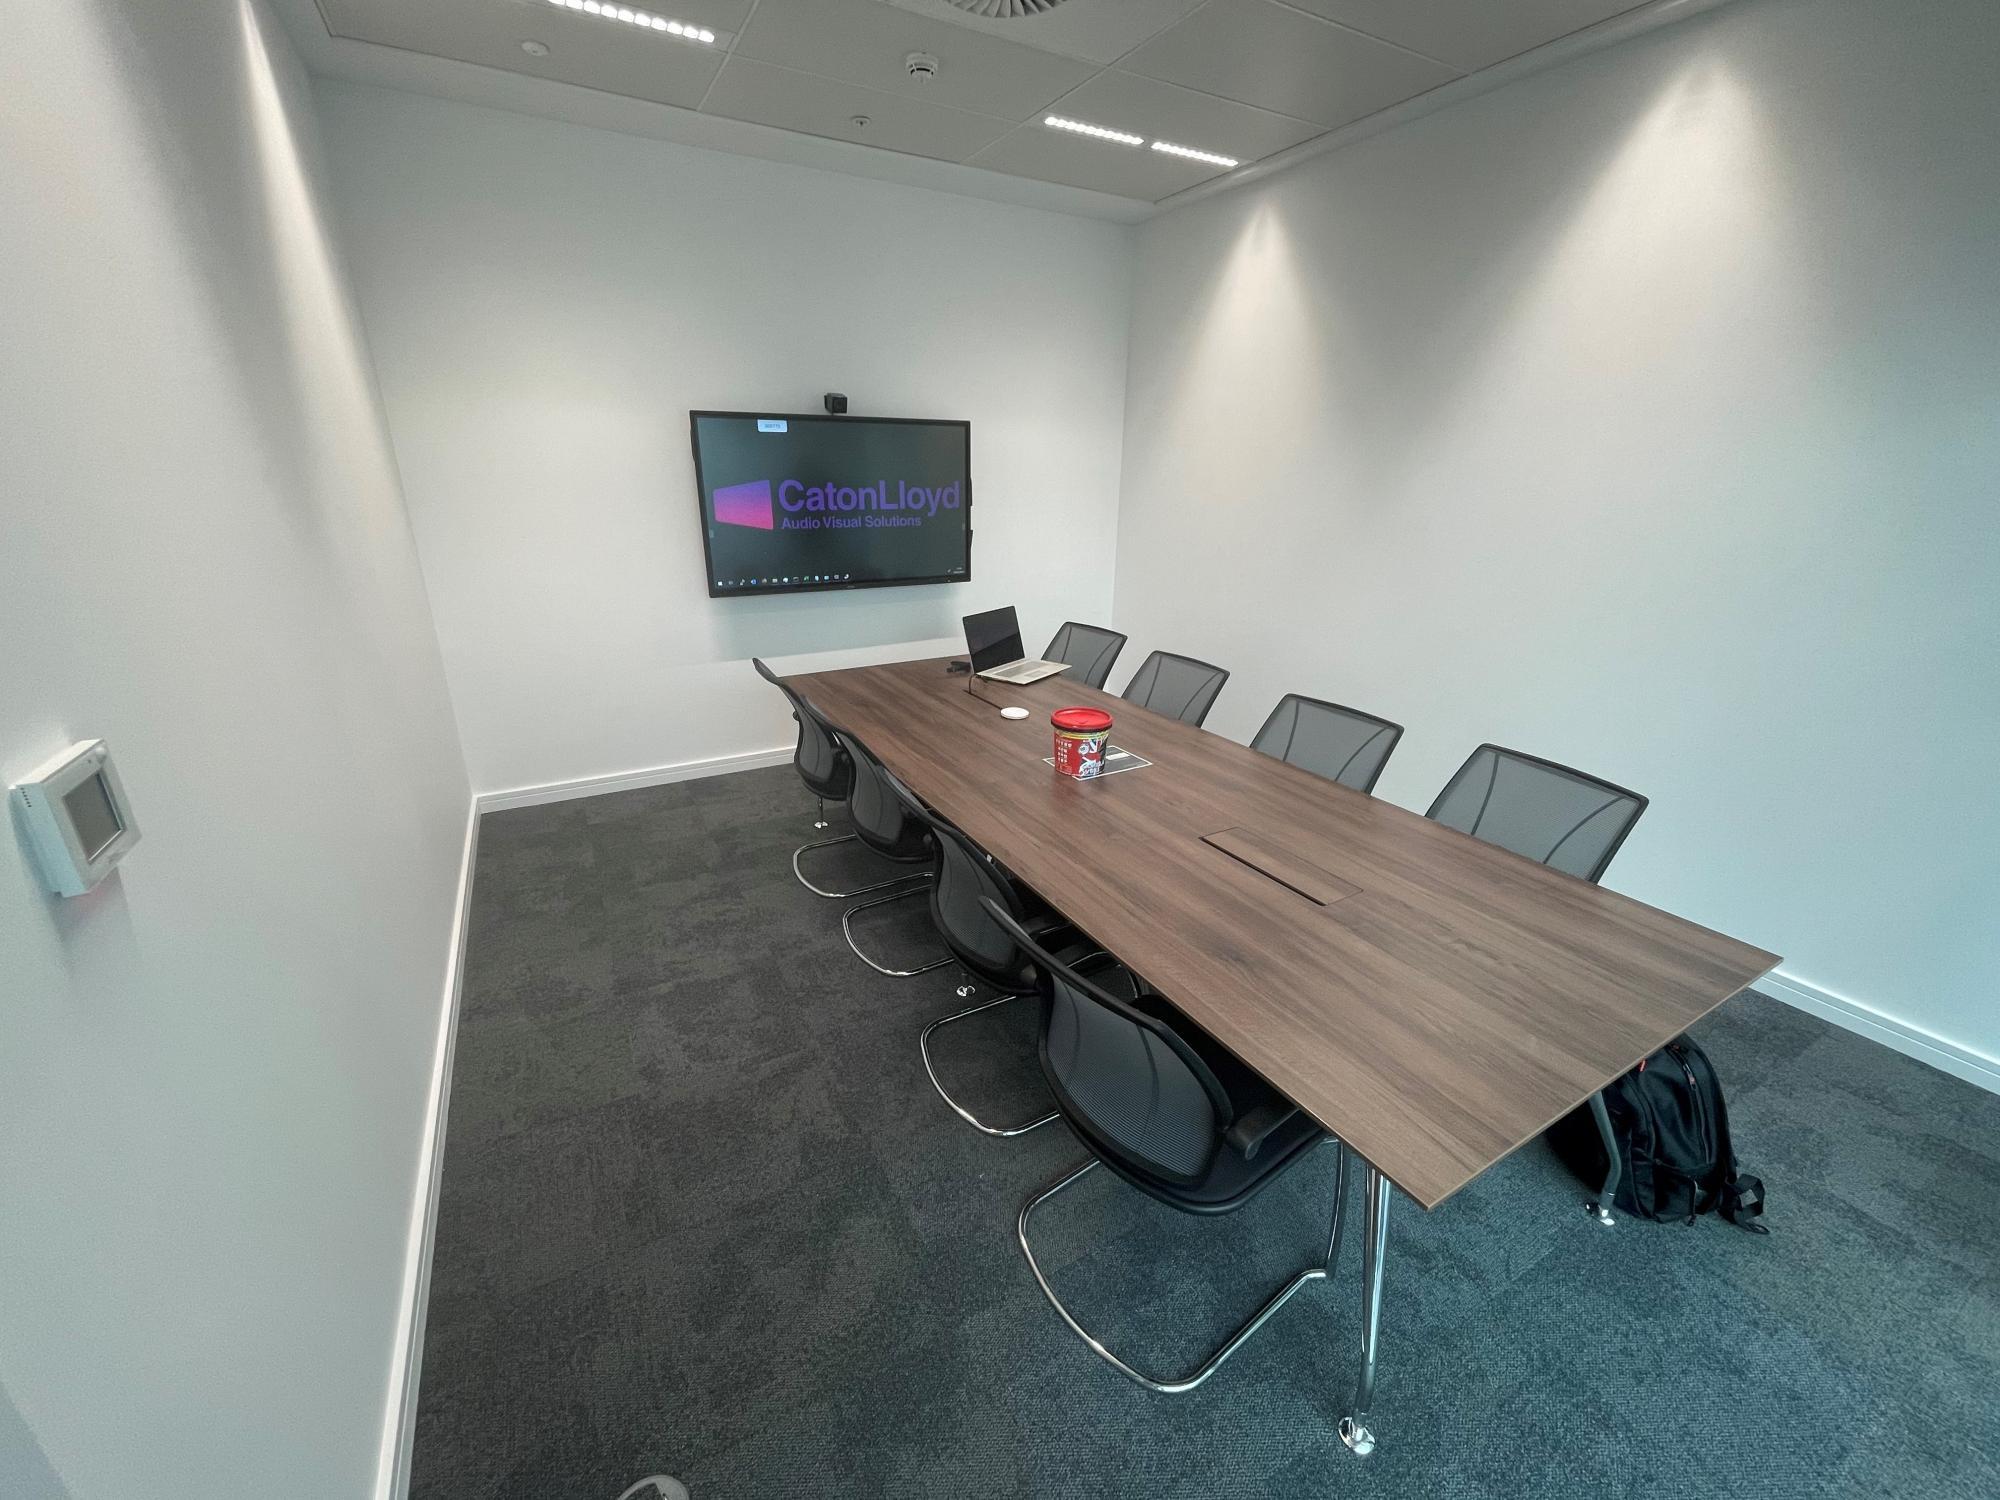 CatonLloyd installs state-of-the-art meeting rooms & video conferencing systems to connect businesses in the UK & worldwide